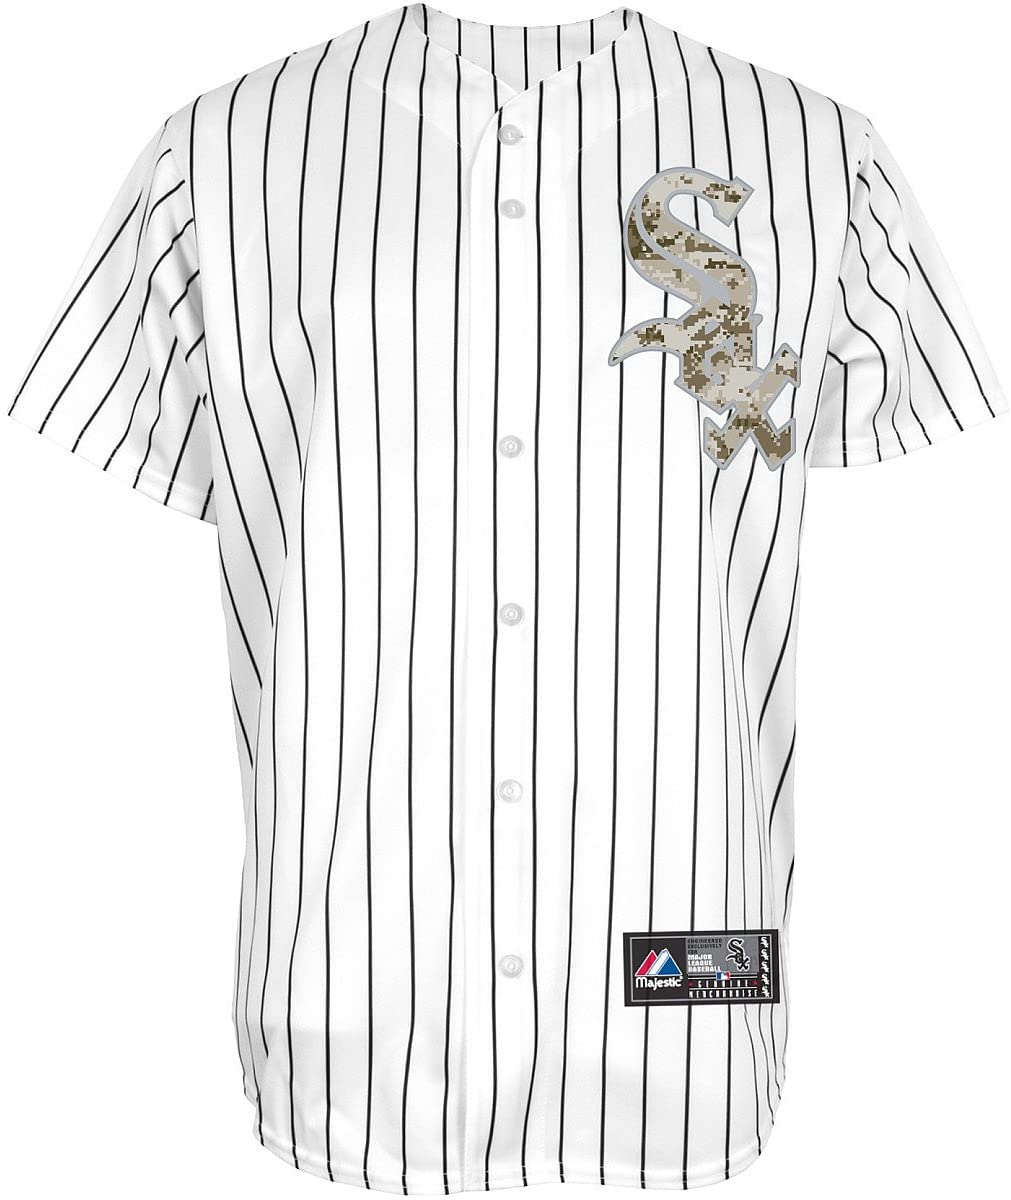 Chicago White Sox Youth Replica USMC Jersey by Majestic Athletic